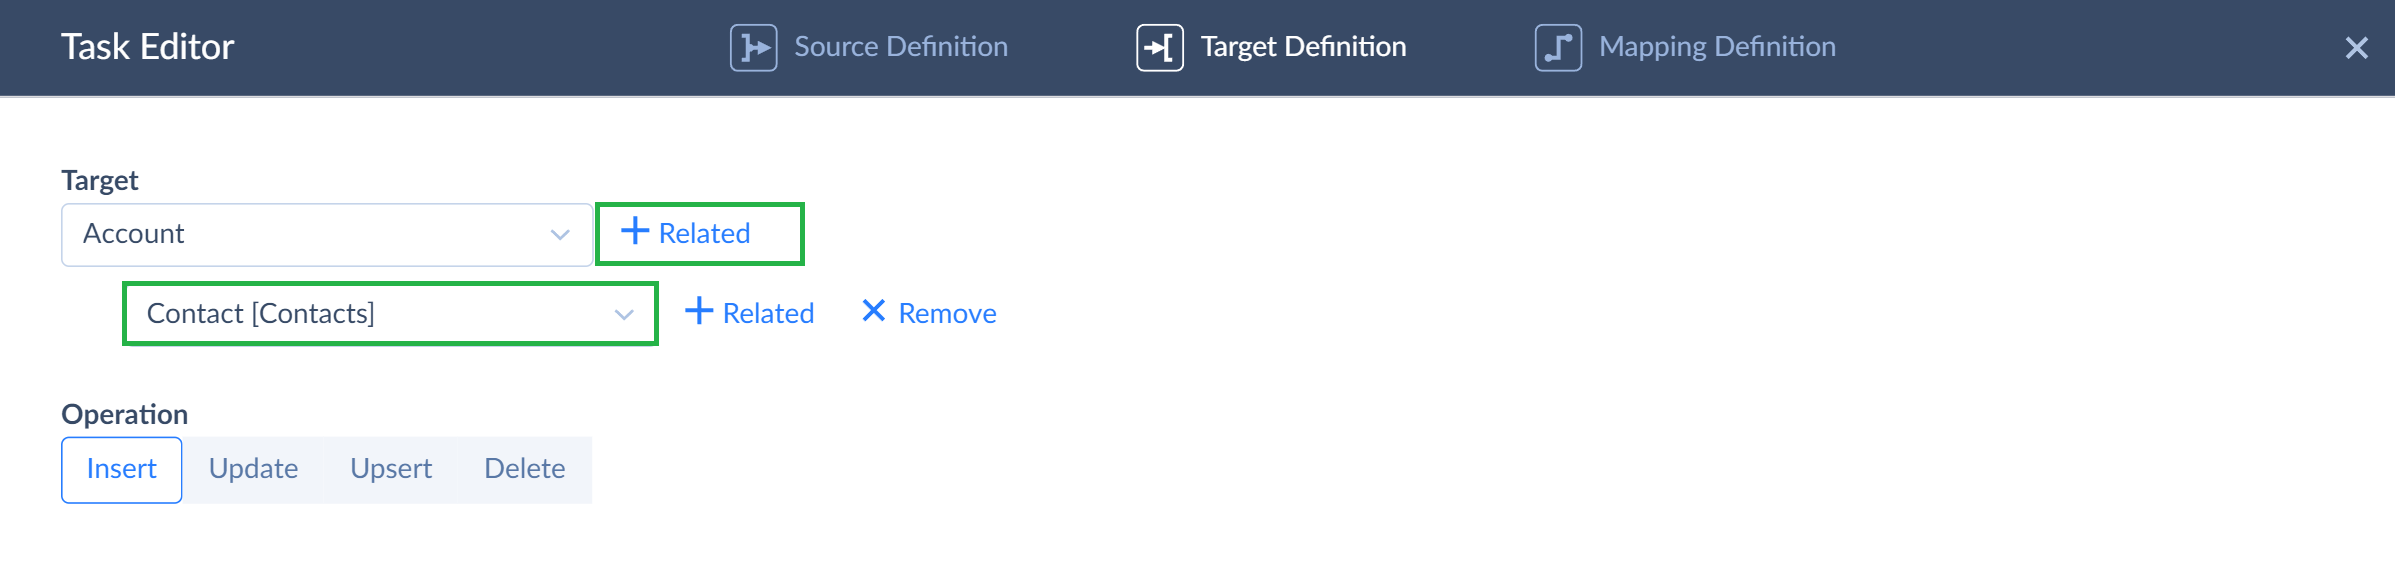 target definition account-contact